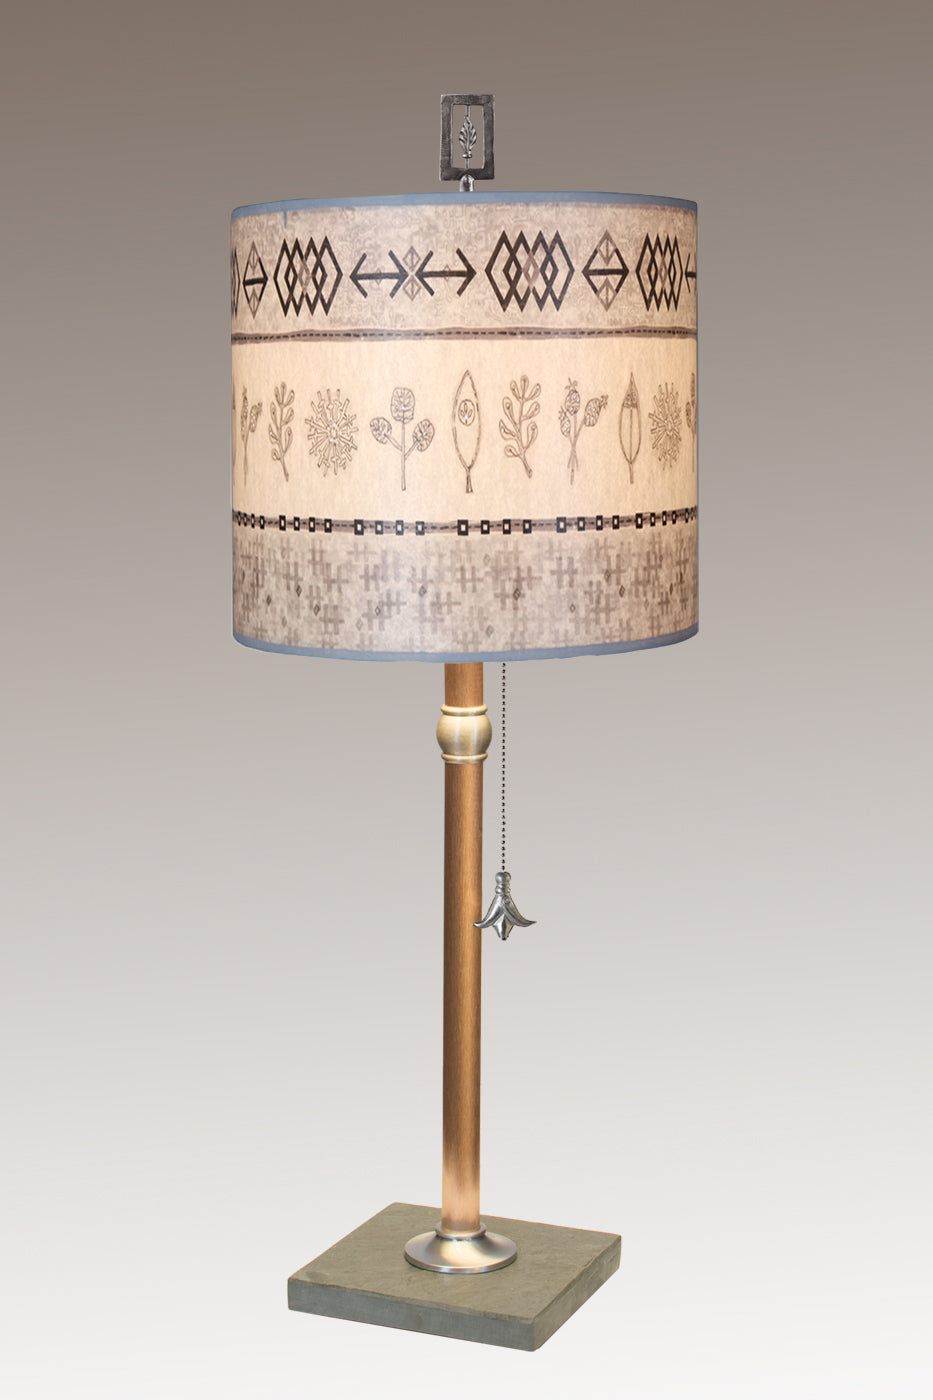 Janna Ugone &amp; Co Table Lamps Copper Table Lamp with Medium Drum Shade in Woven &amp; Sprig in Mist